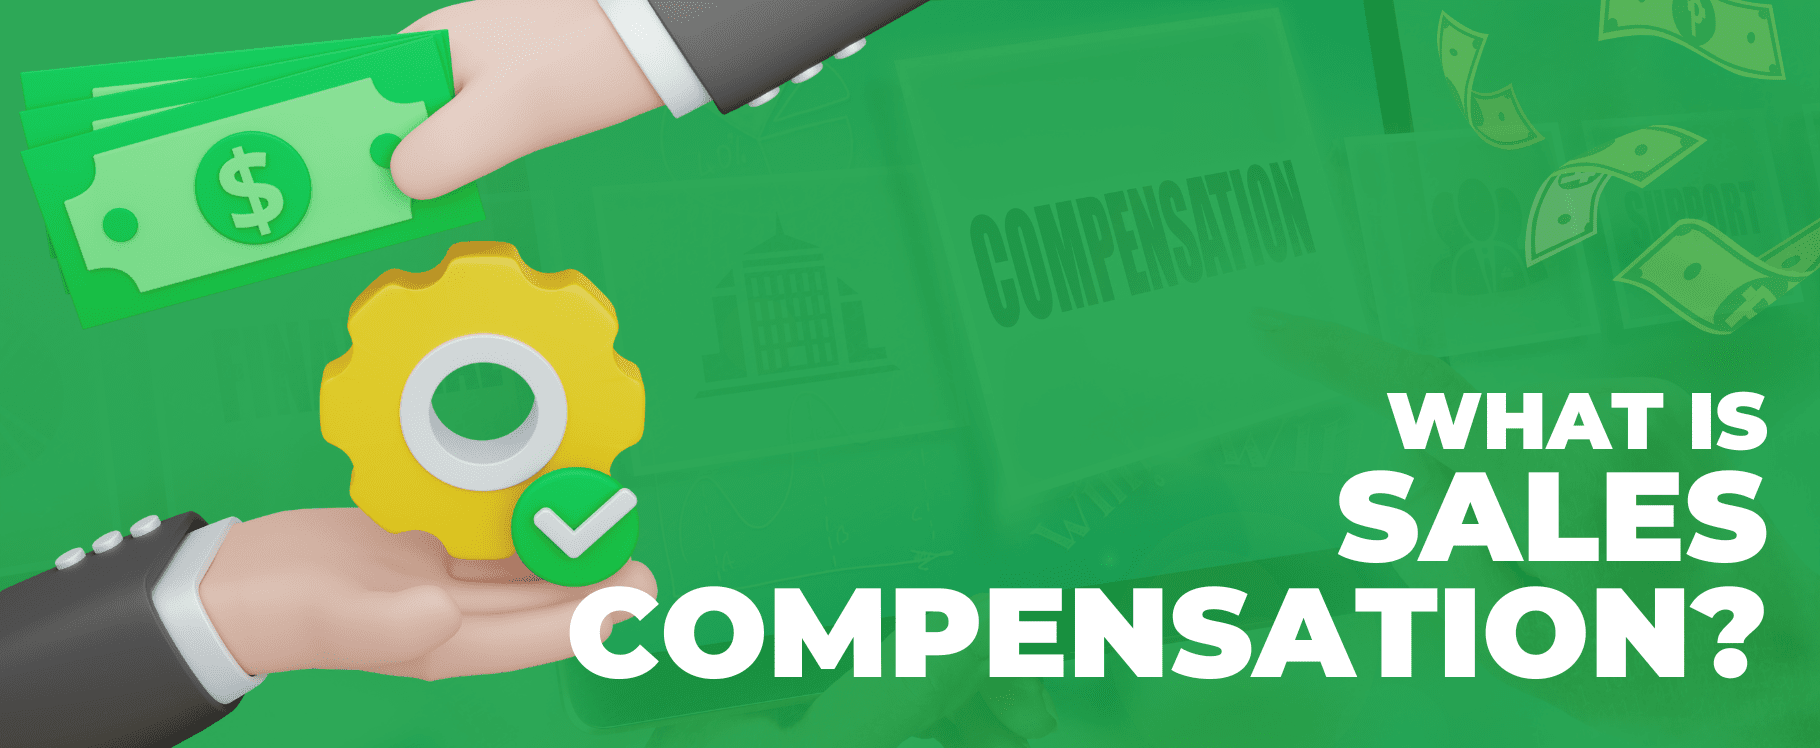 what is sales compensation